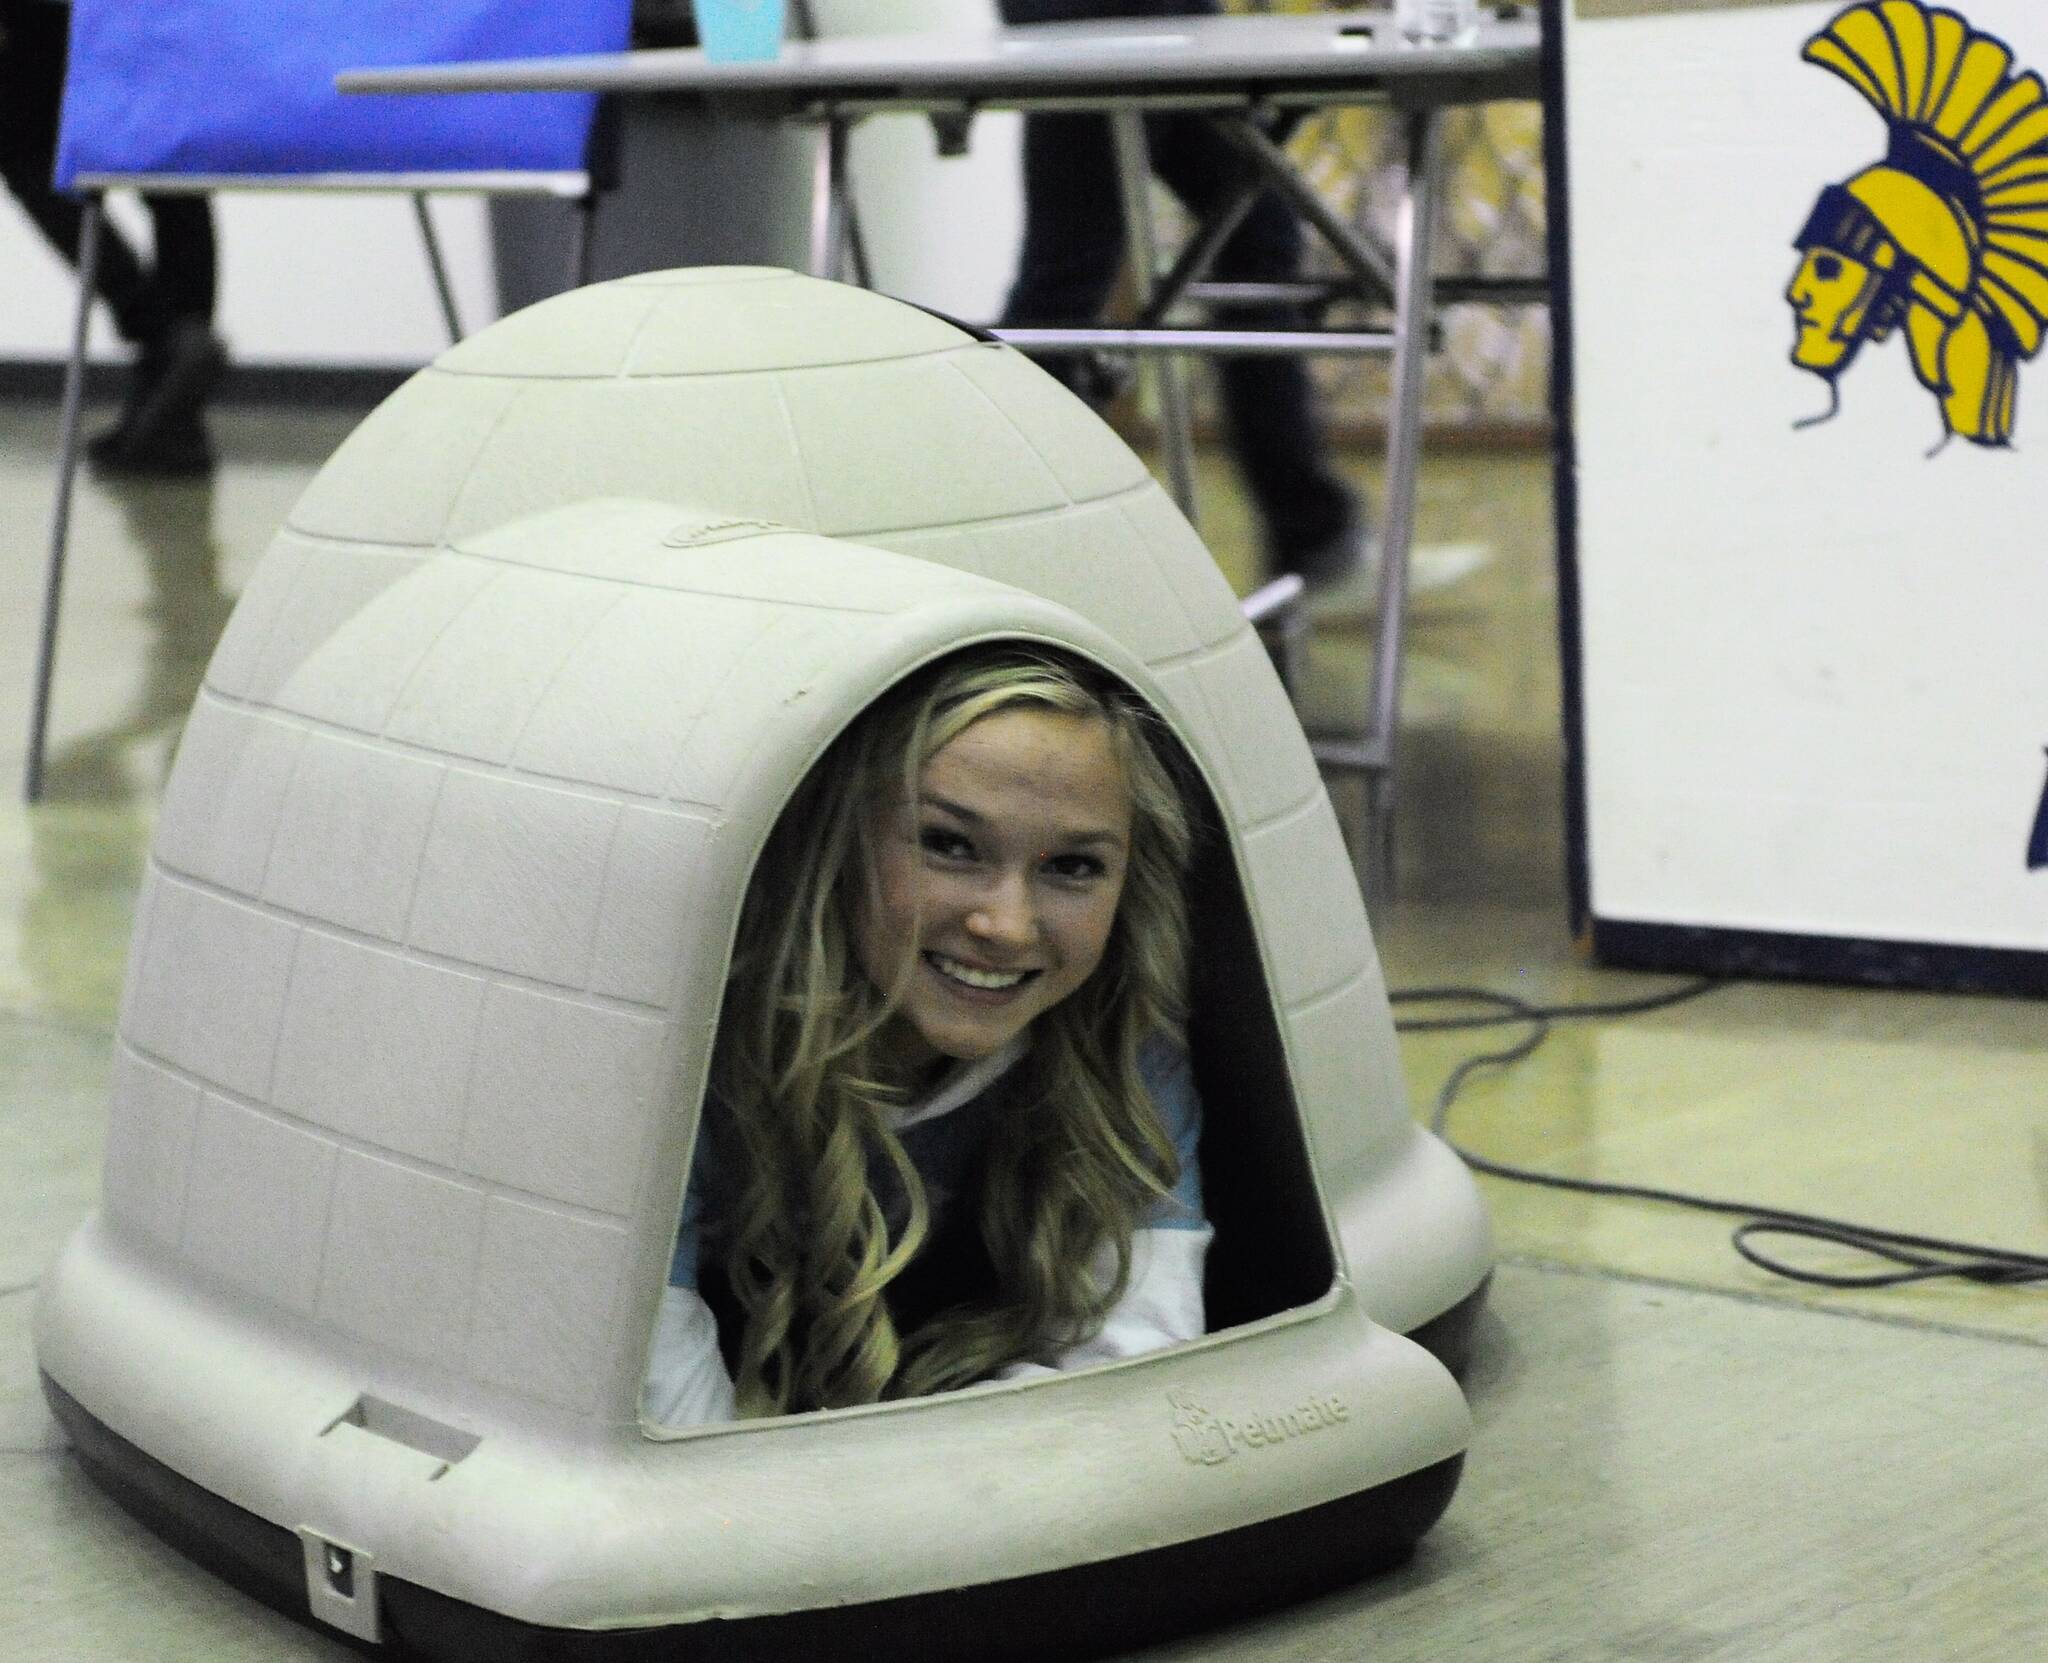 Forks senior Zoie Davis demonstrates a dog house up for bid Sunday during the Quillayute Valley Scholarship Auction. Photo by Lonnie Archibald